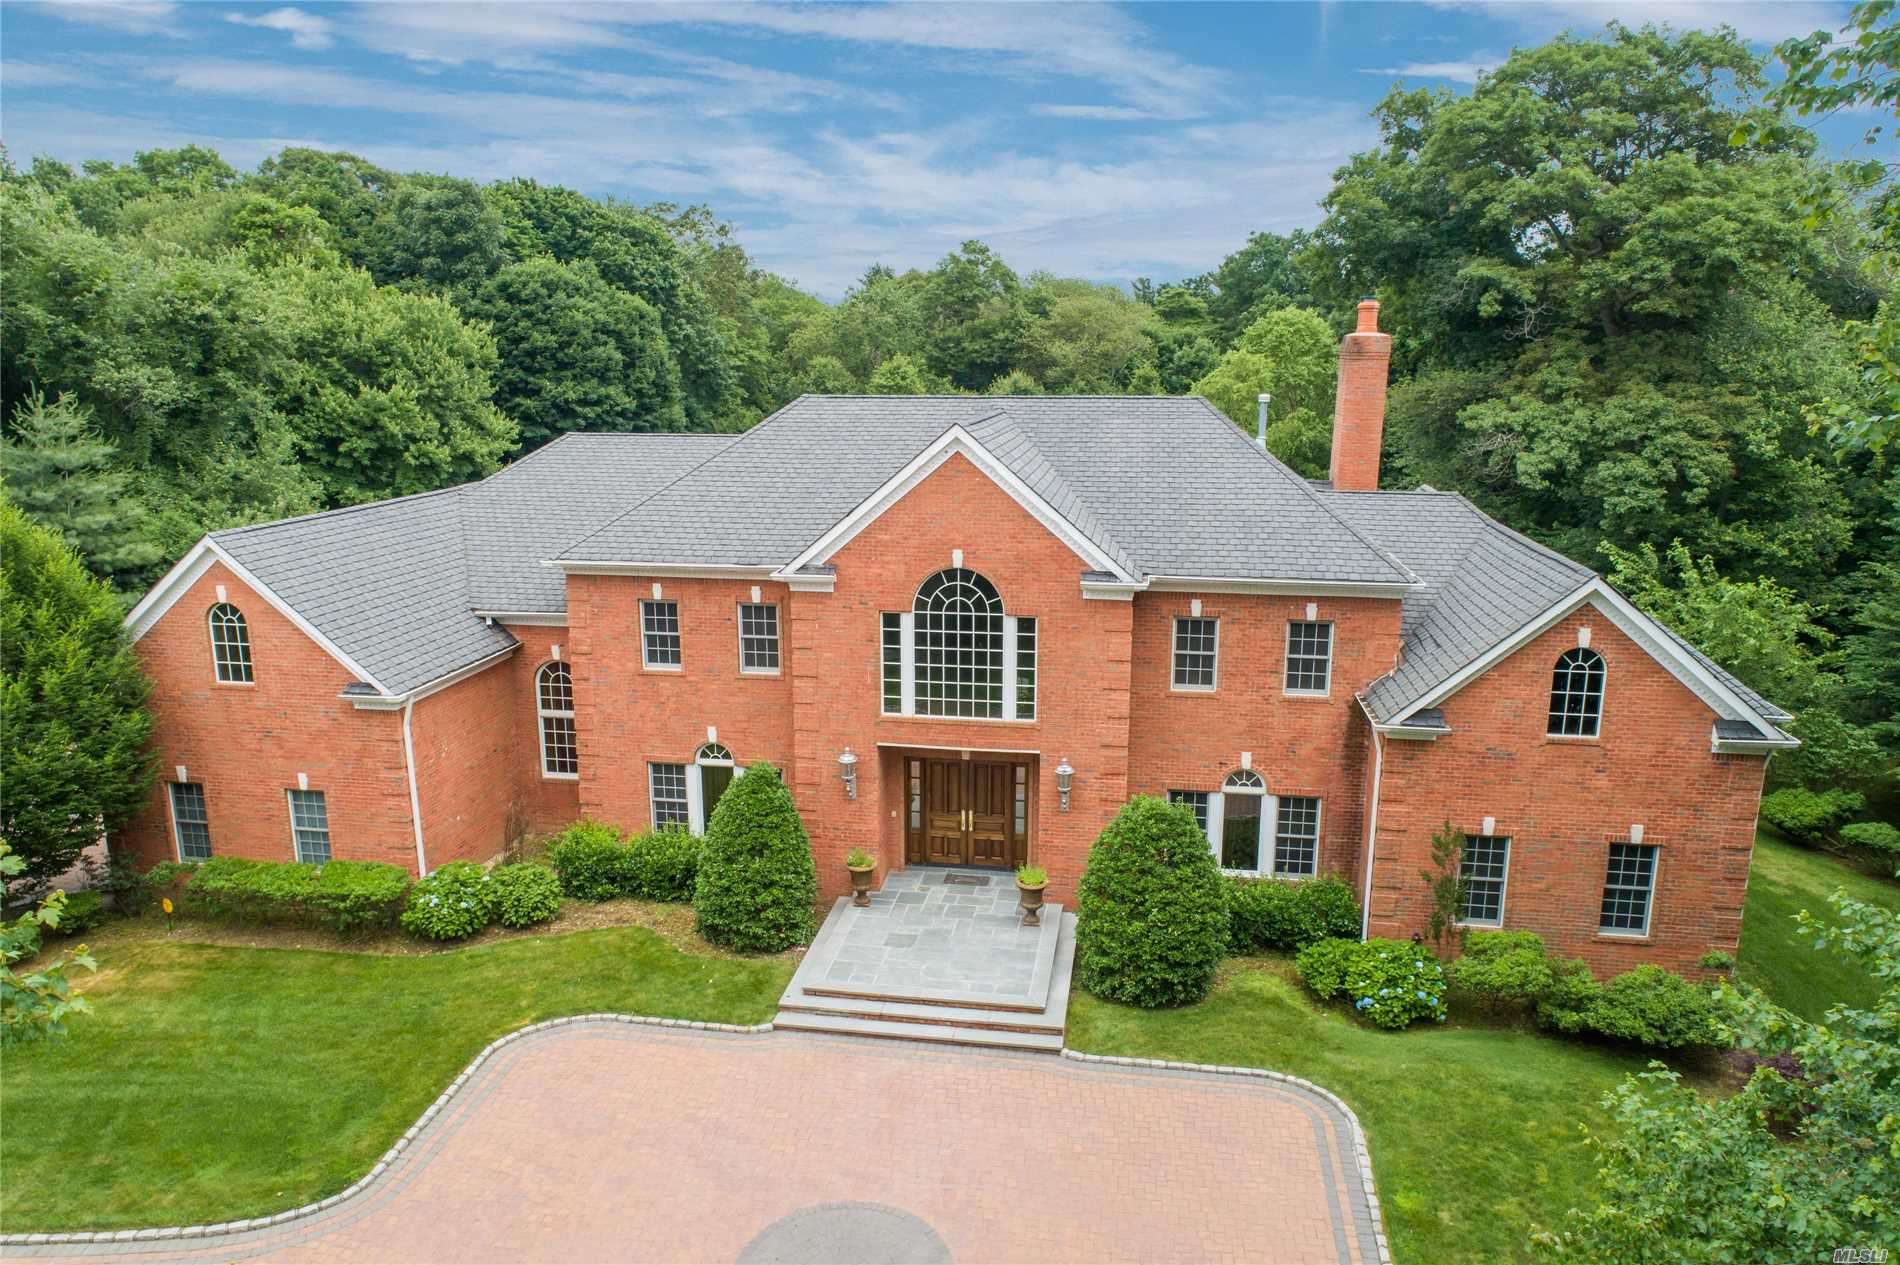 Builders Own! Gated Private Road Leads To This Elegant Brick Centre Hall Colonial On 5.4 Manicured Acres. Over 6600 Sq.Ft Of Luxurious Living In The Incorporated Village Of Old Westbury. Double Entry Foyer, State Of The Art Gourmet Eik Overlooking Formal English Gardens. Expansive Living Room, Dining Room, Den W/Fpl, Office, Bonus Room, Master Suite W/Fpl, 5 Bedrooms And 4 Baths. Movie Theatre. 3 Car Garage And Tennis Court. Room For A Pool. Jericho Schools!